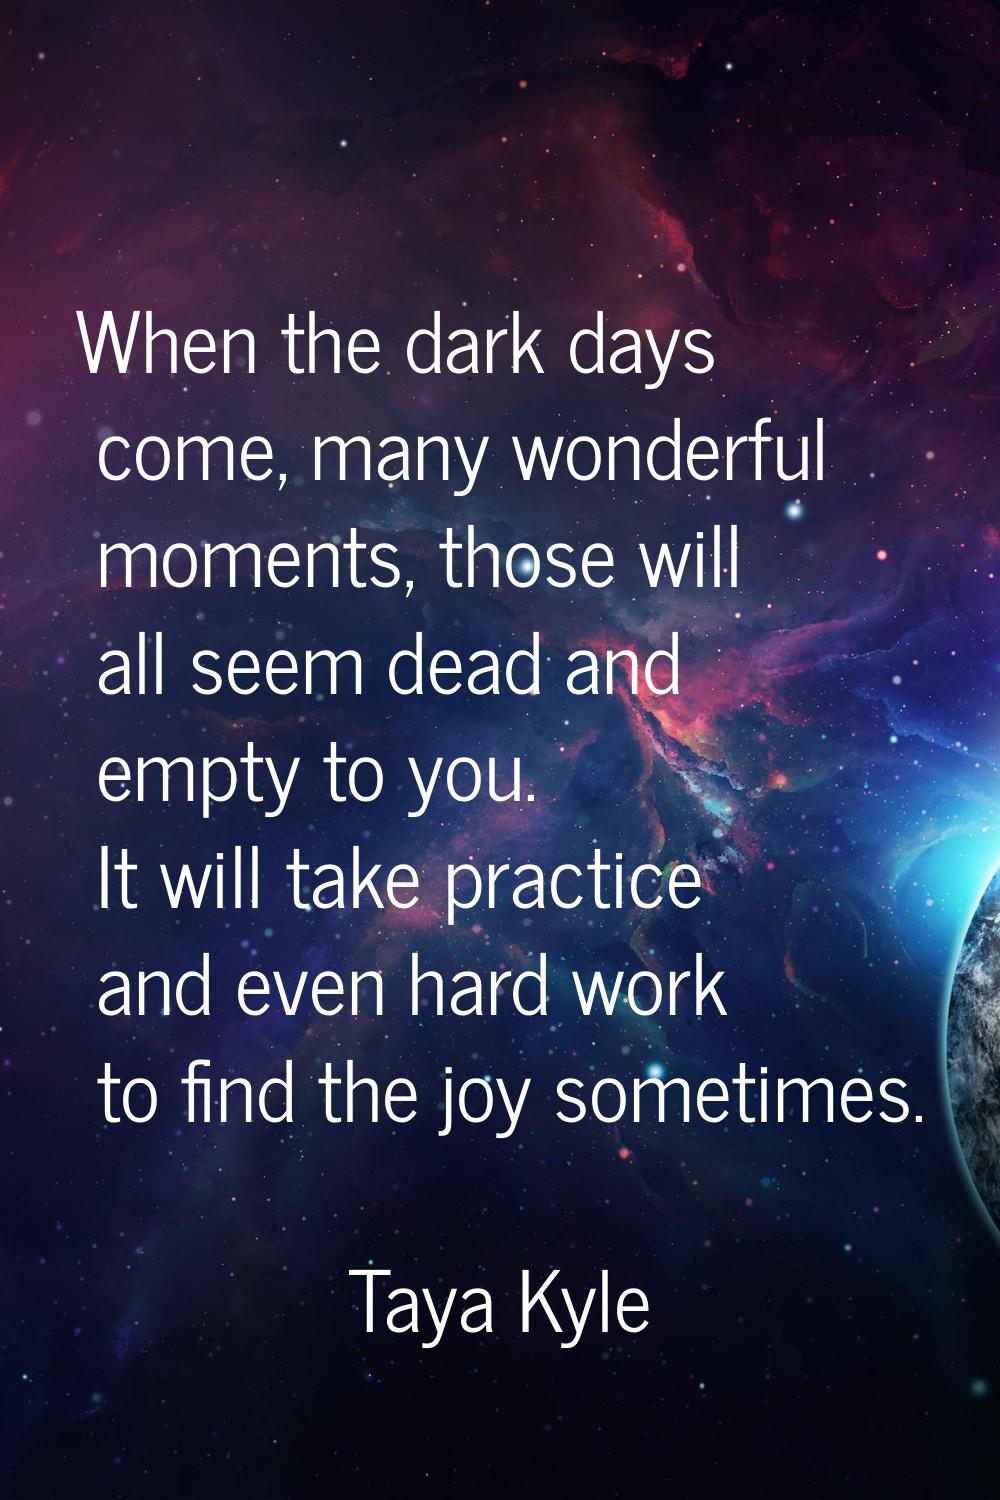 When the dark days come, many wonderful moments, those will all seem dead and empty to you. It will